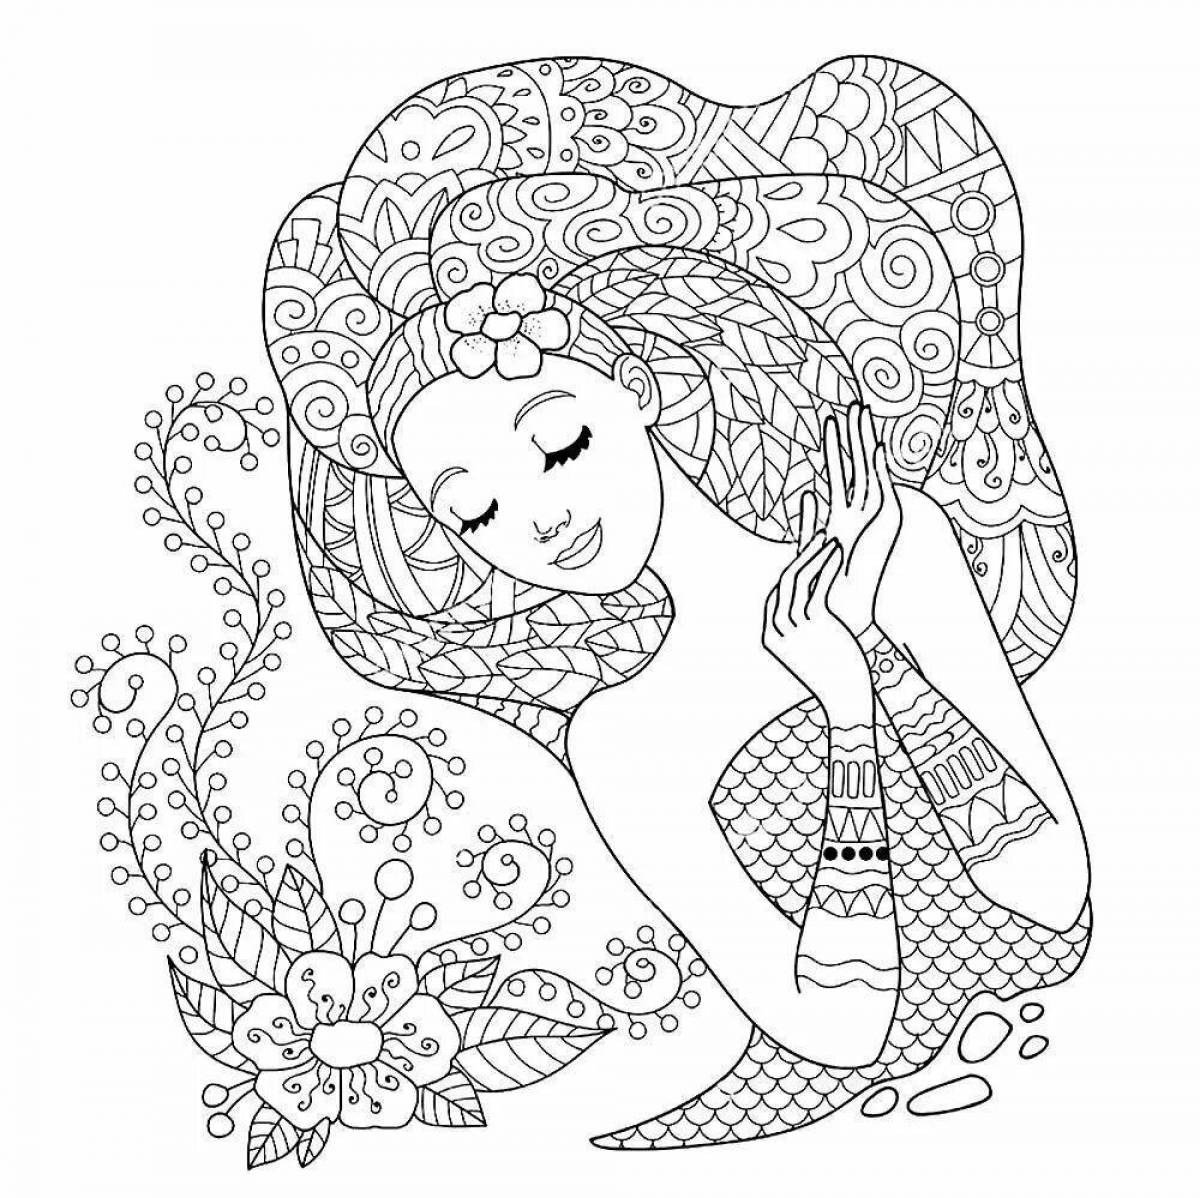 Fun anti-stress coloring book for 5 year olds